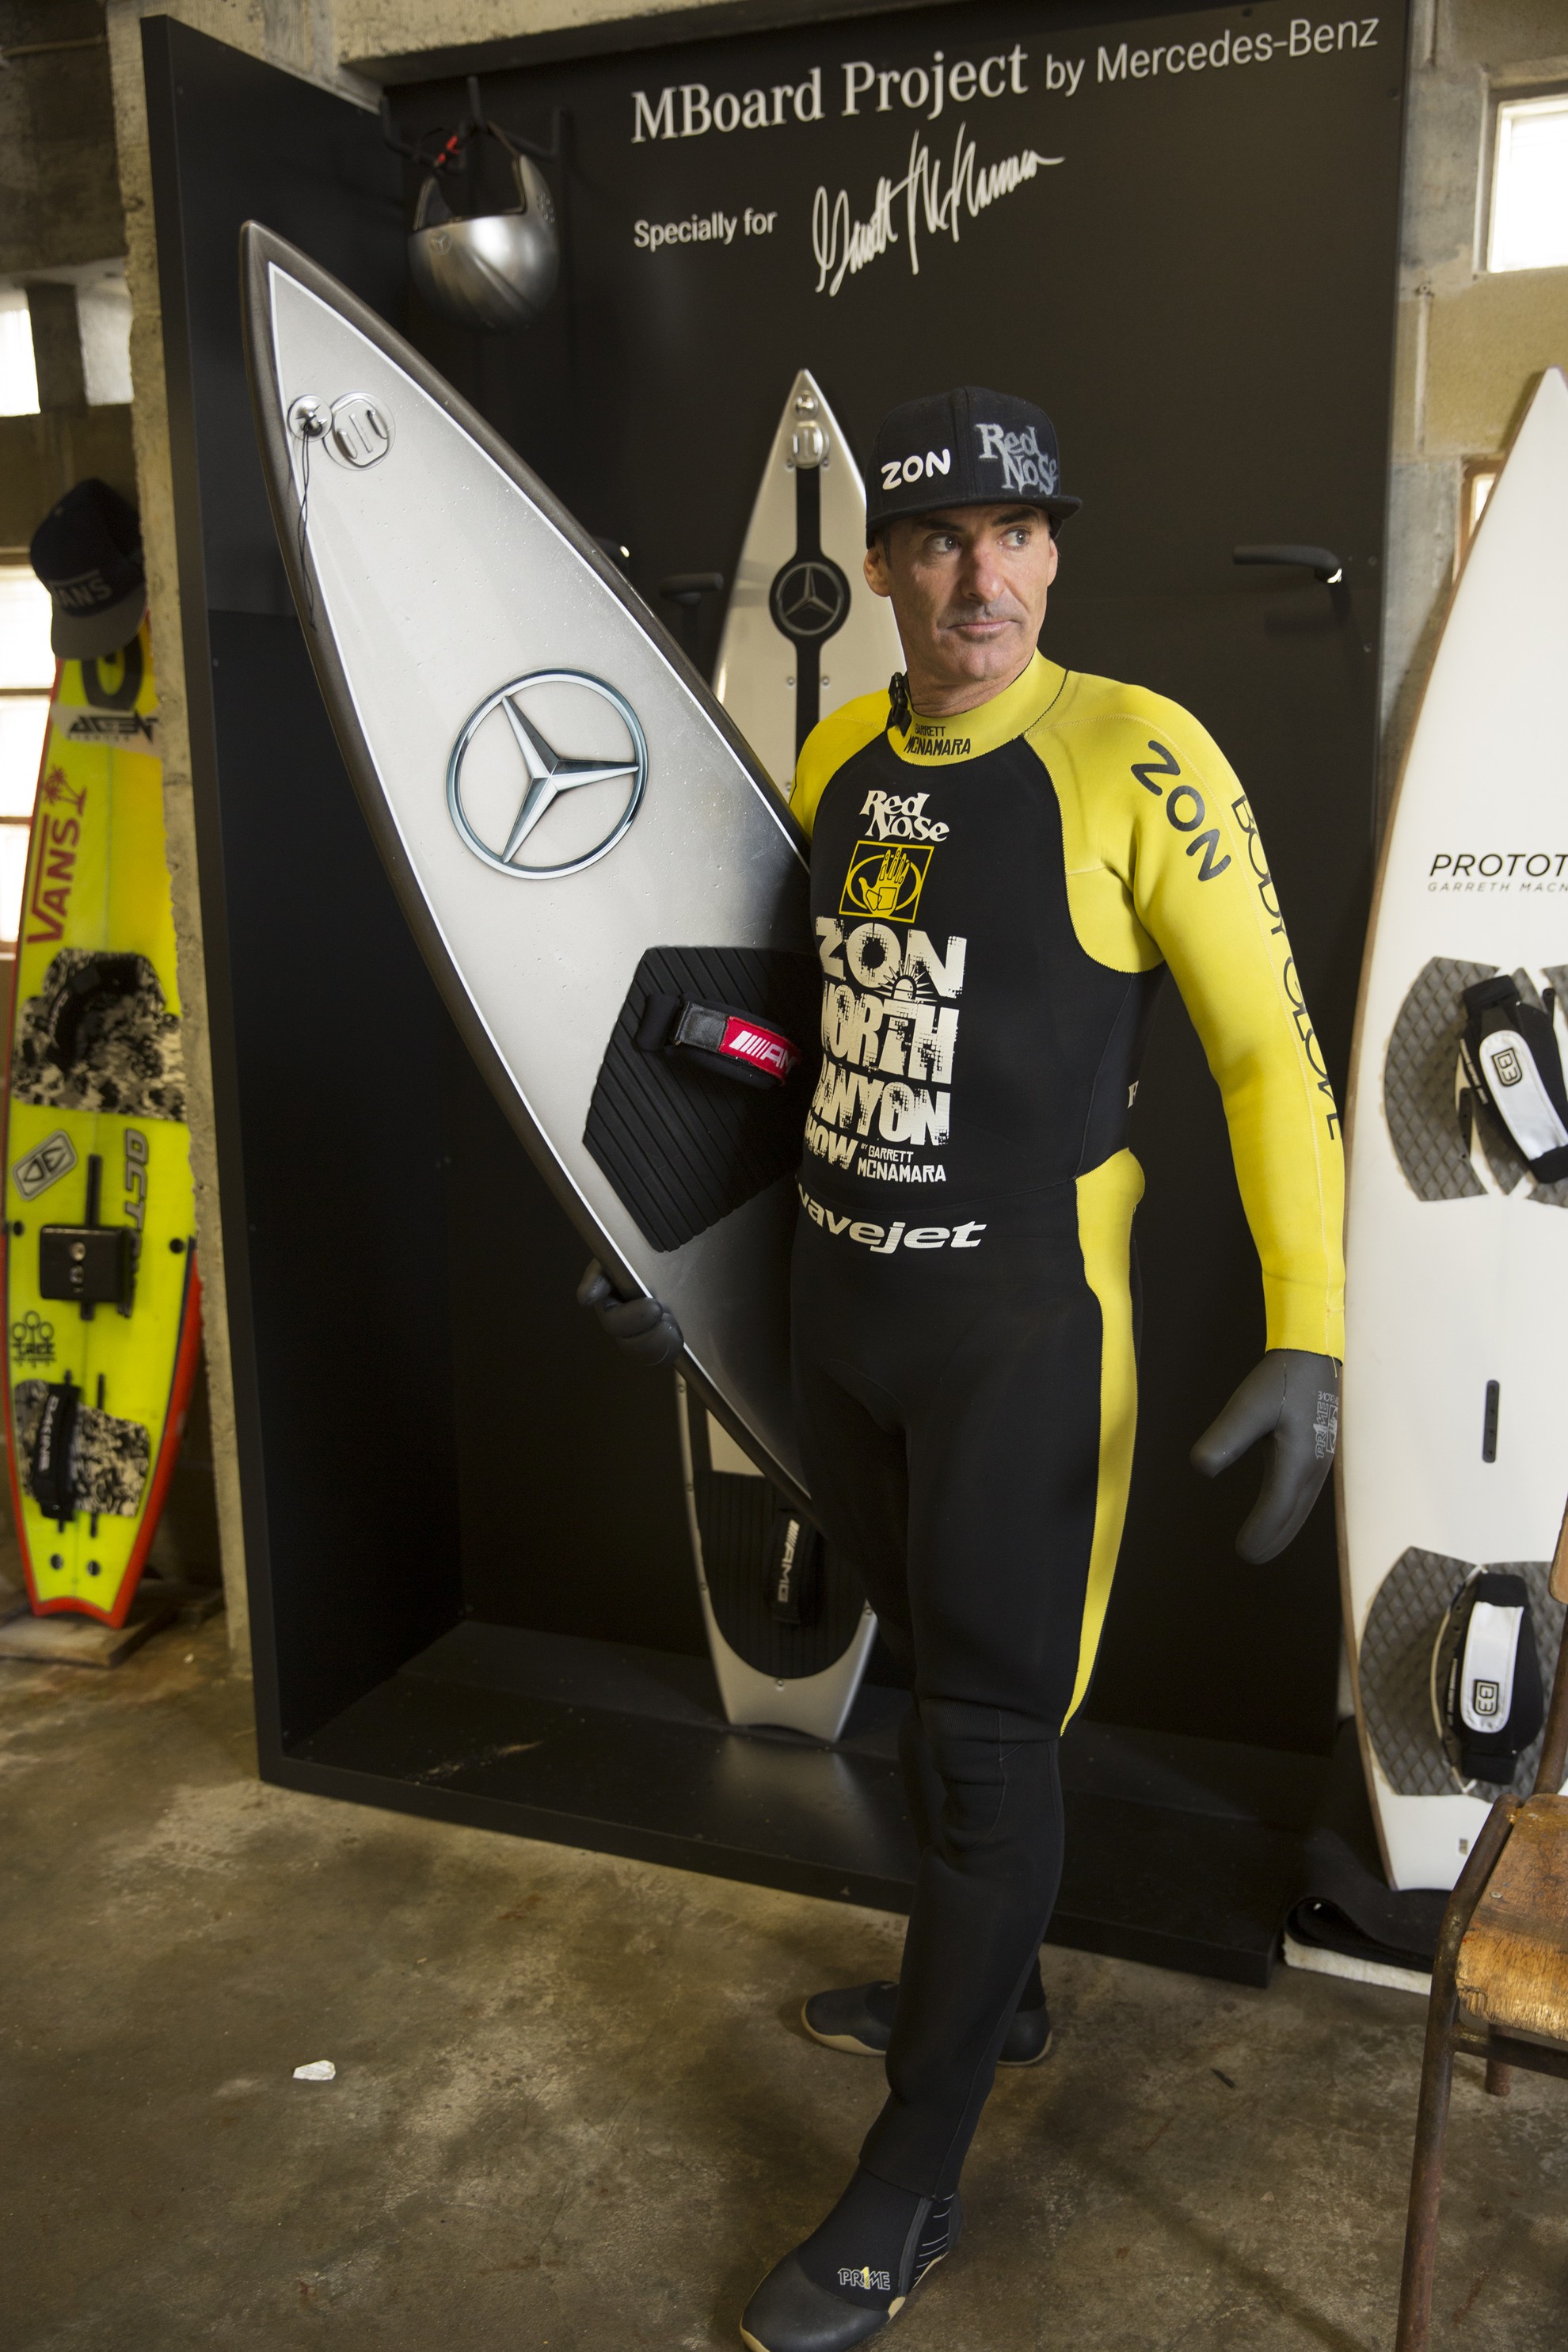 Mercedes-Benz Surfboard for Biggest Wave in the World